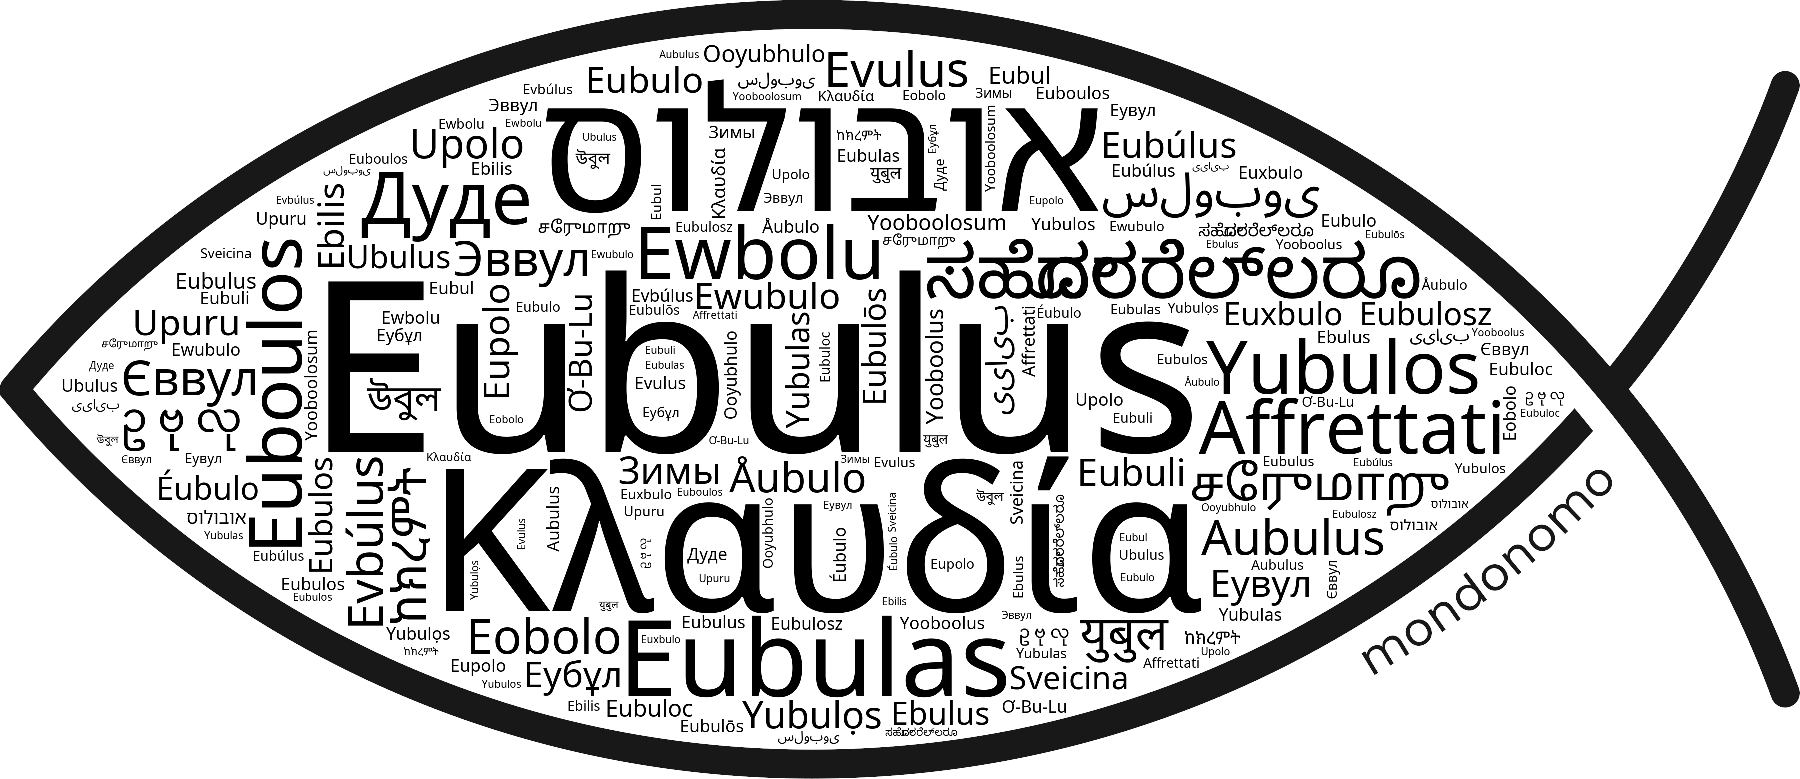 Name Eubulus in the world's Bibles